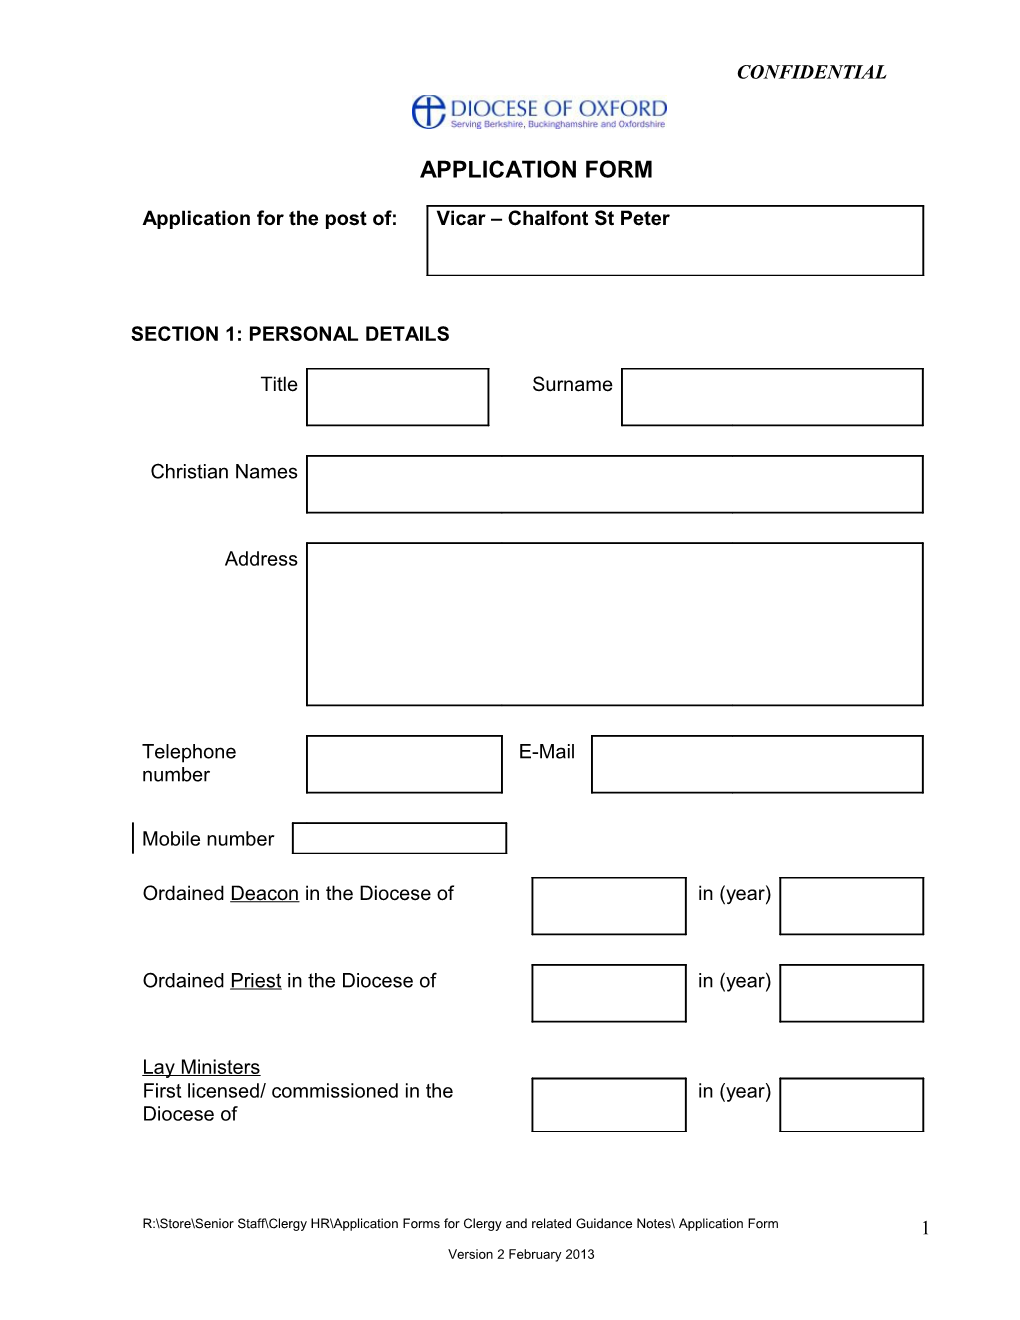 Application Form s17